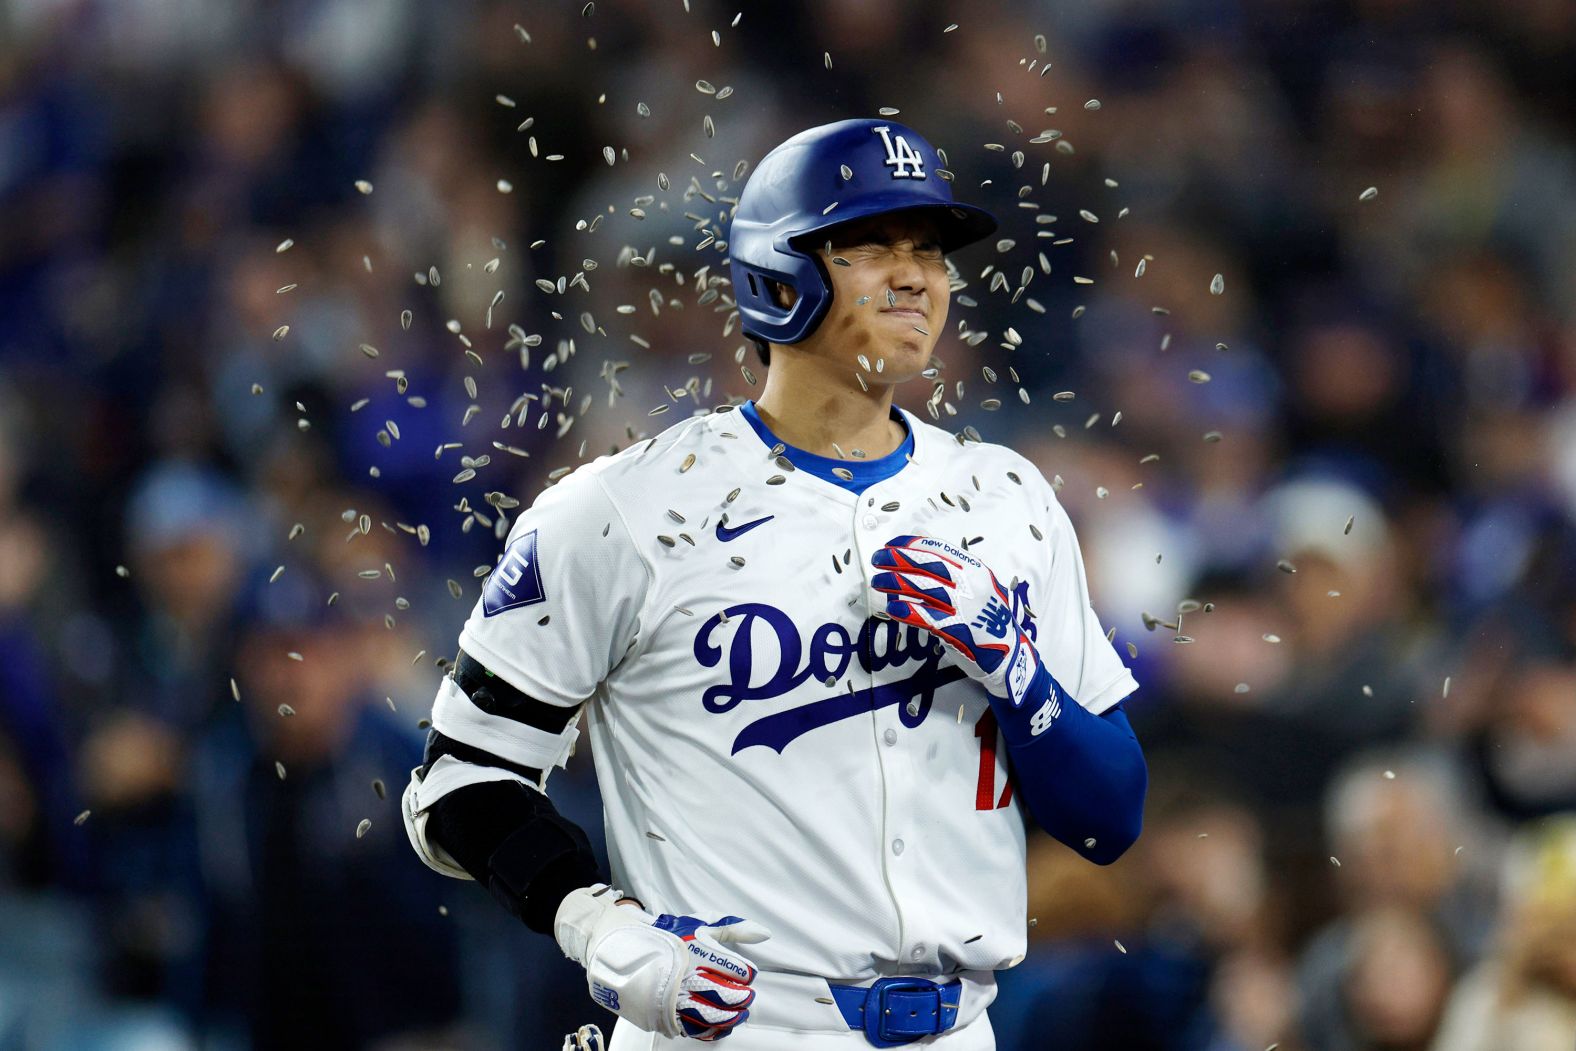 Los Angeles Dodgers star Shohei Ohtani is showered with sunflower seeds by teammate Teoscar Hernandez, not pictured, after hitting his first home run as a Dodger on Wednesday, April 3. Ohtani signed an unparalleled 10-year, $700 million deal with the Dodgers this offseason.